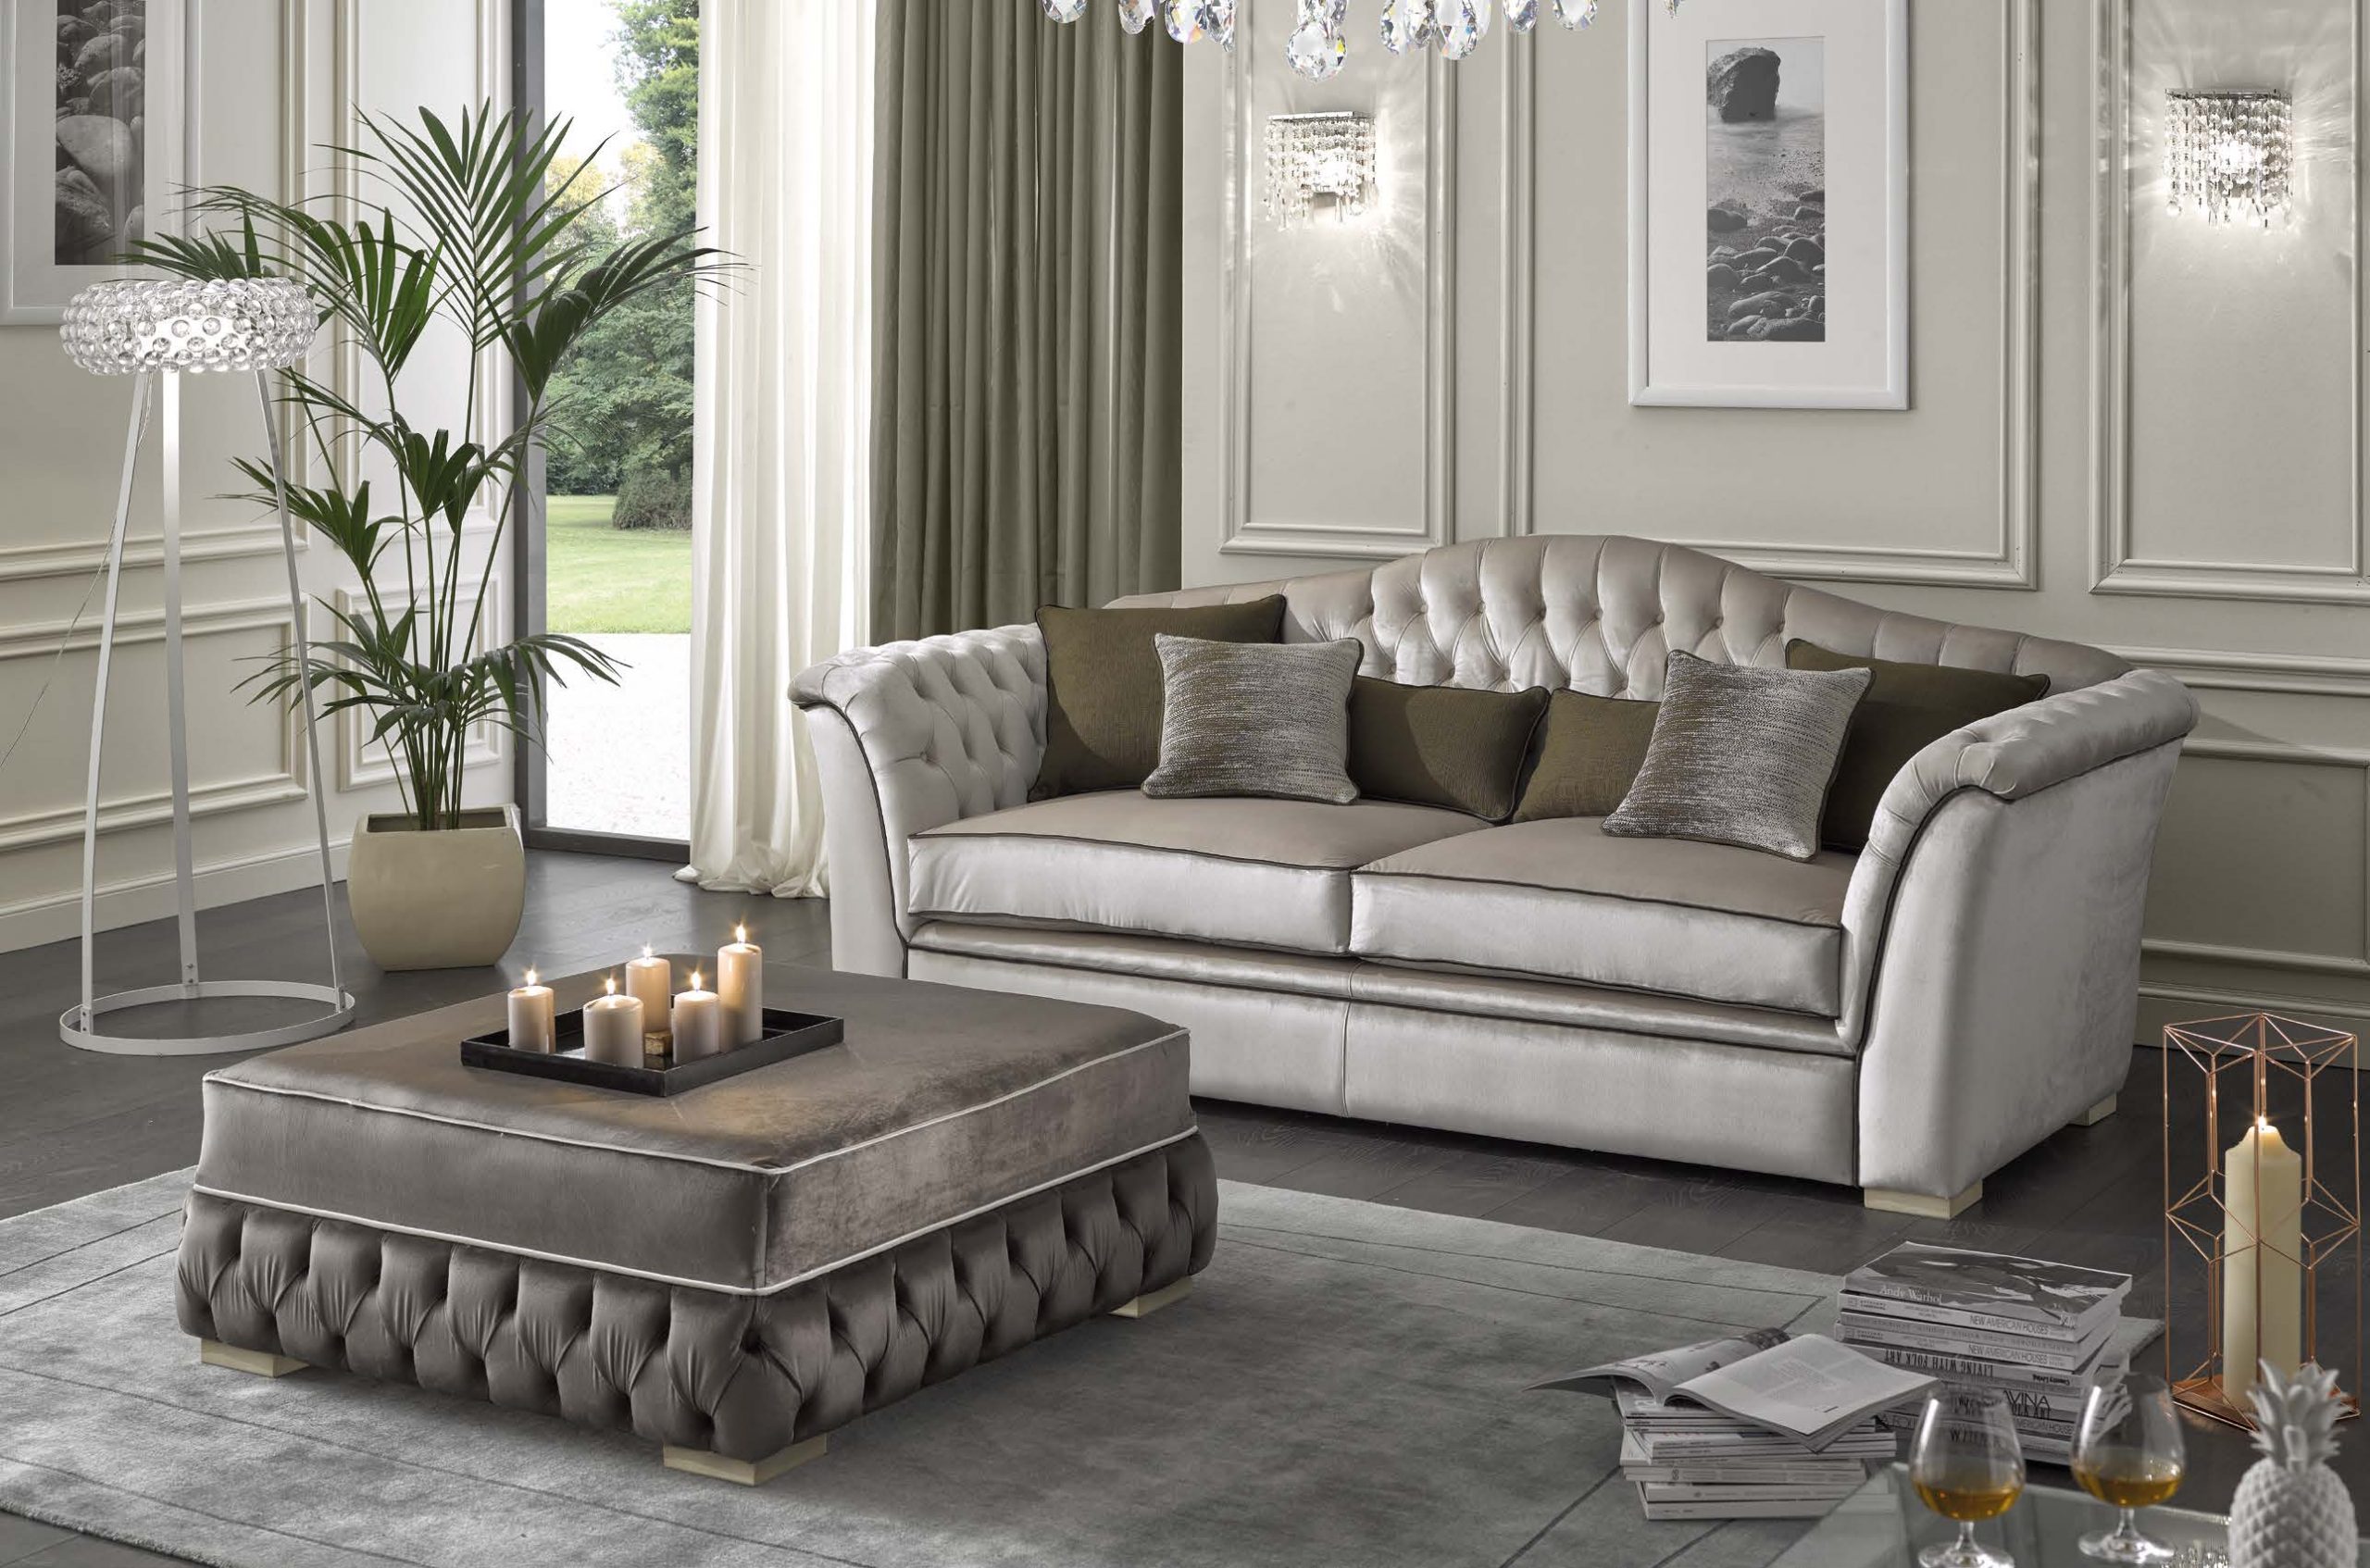 Buy Luxury and Stunning Upholstery for Your Home